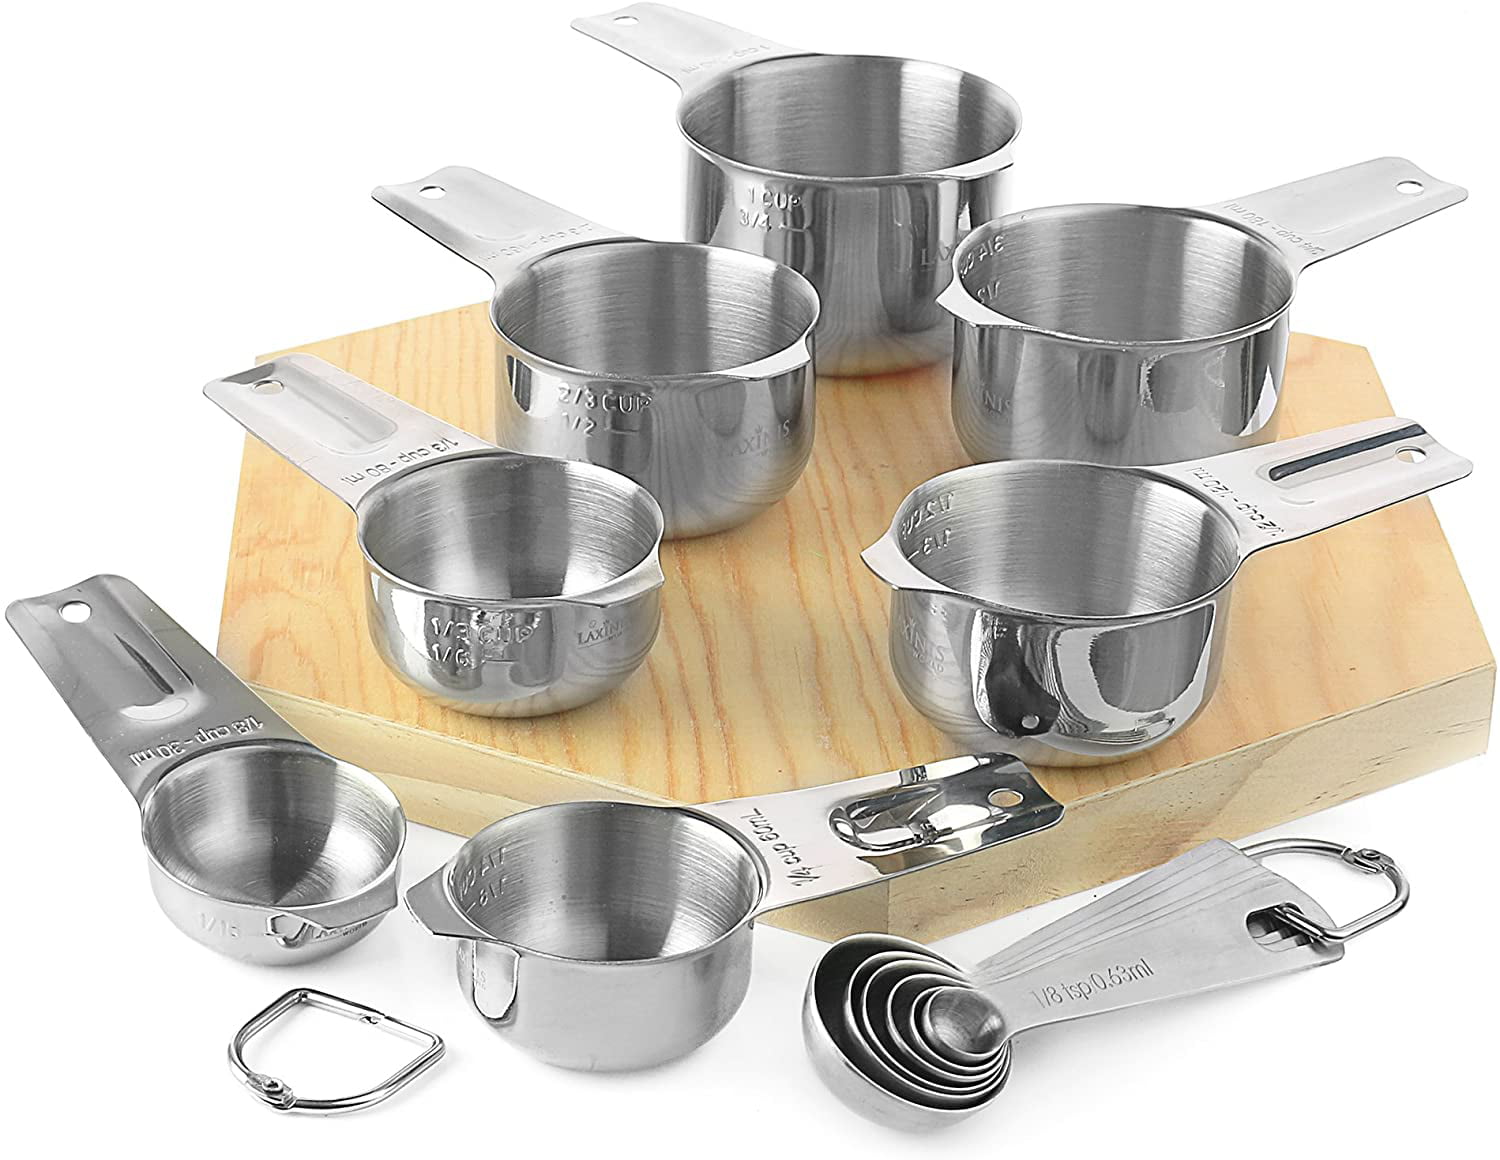 13-Pack, Stainless Steel Measuring Spoon & Cup Set by Last Confection, 3.5  x 3.25 - Fred Meyer